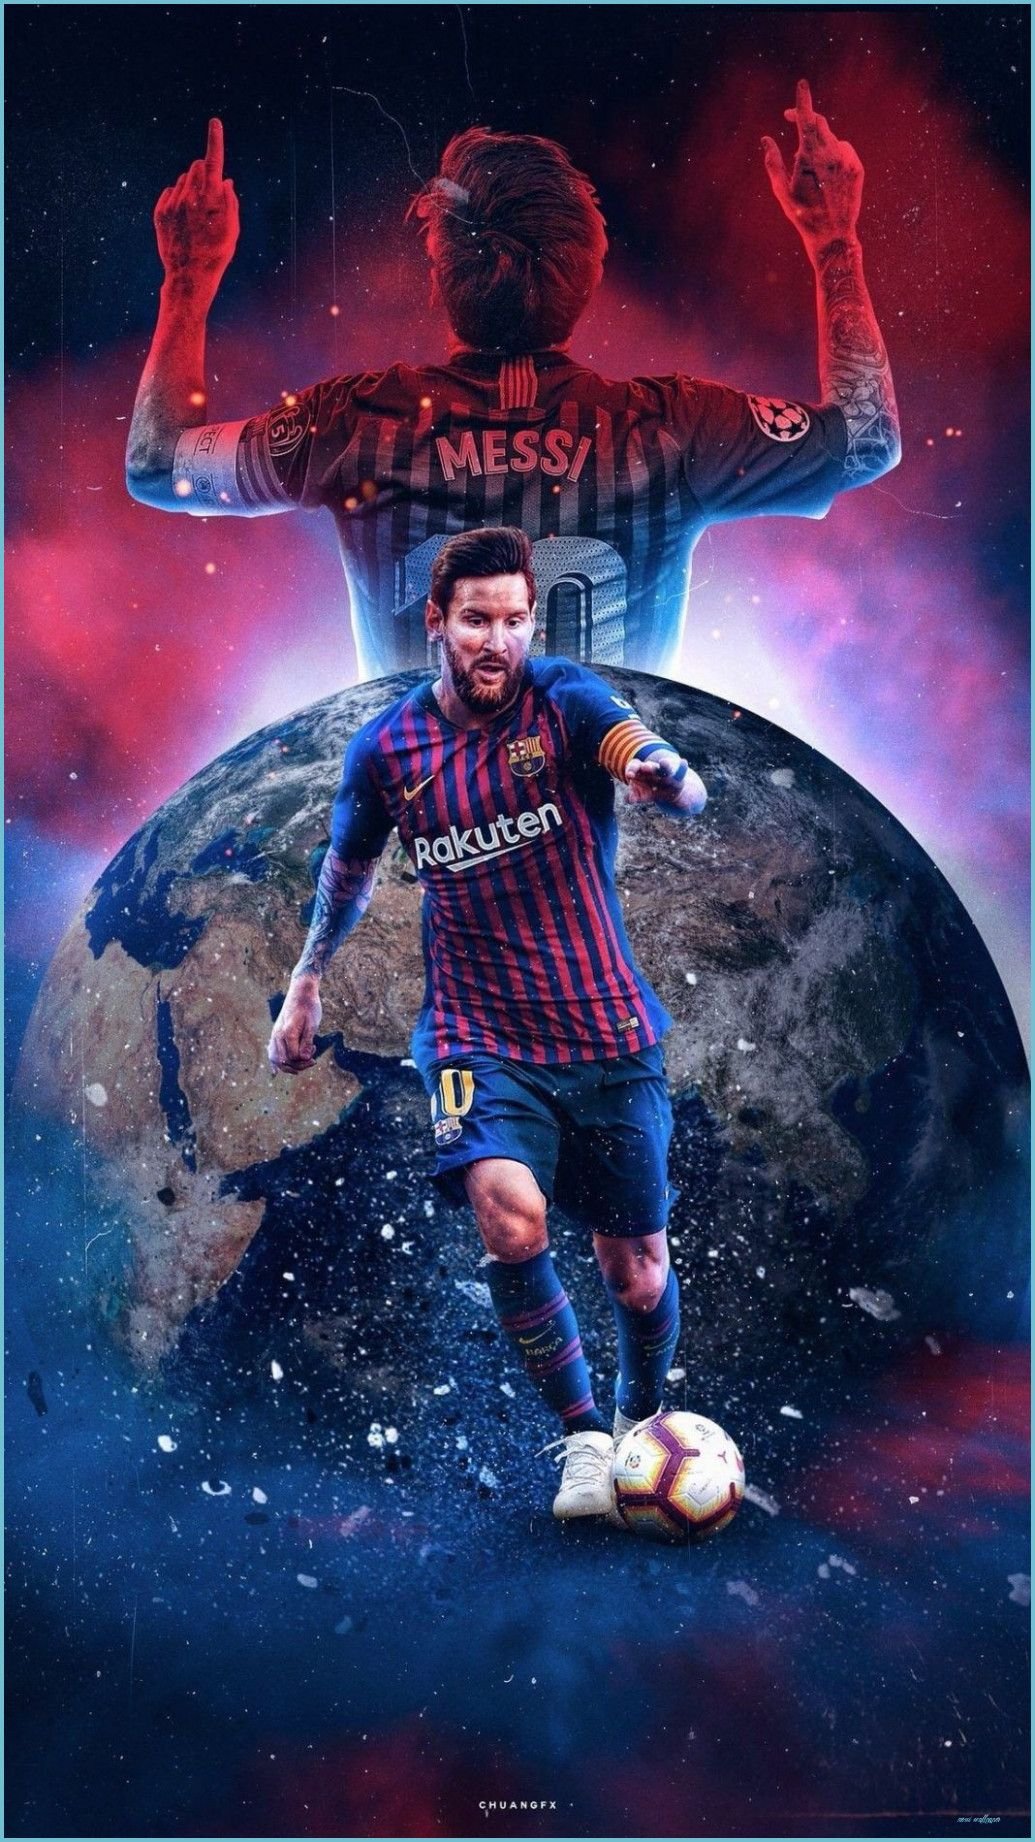 Messi Art Wallpapers  Aesthetic Messi Wallpapers for iPhone 4k